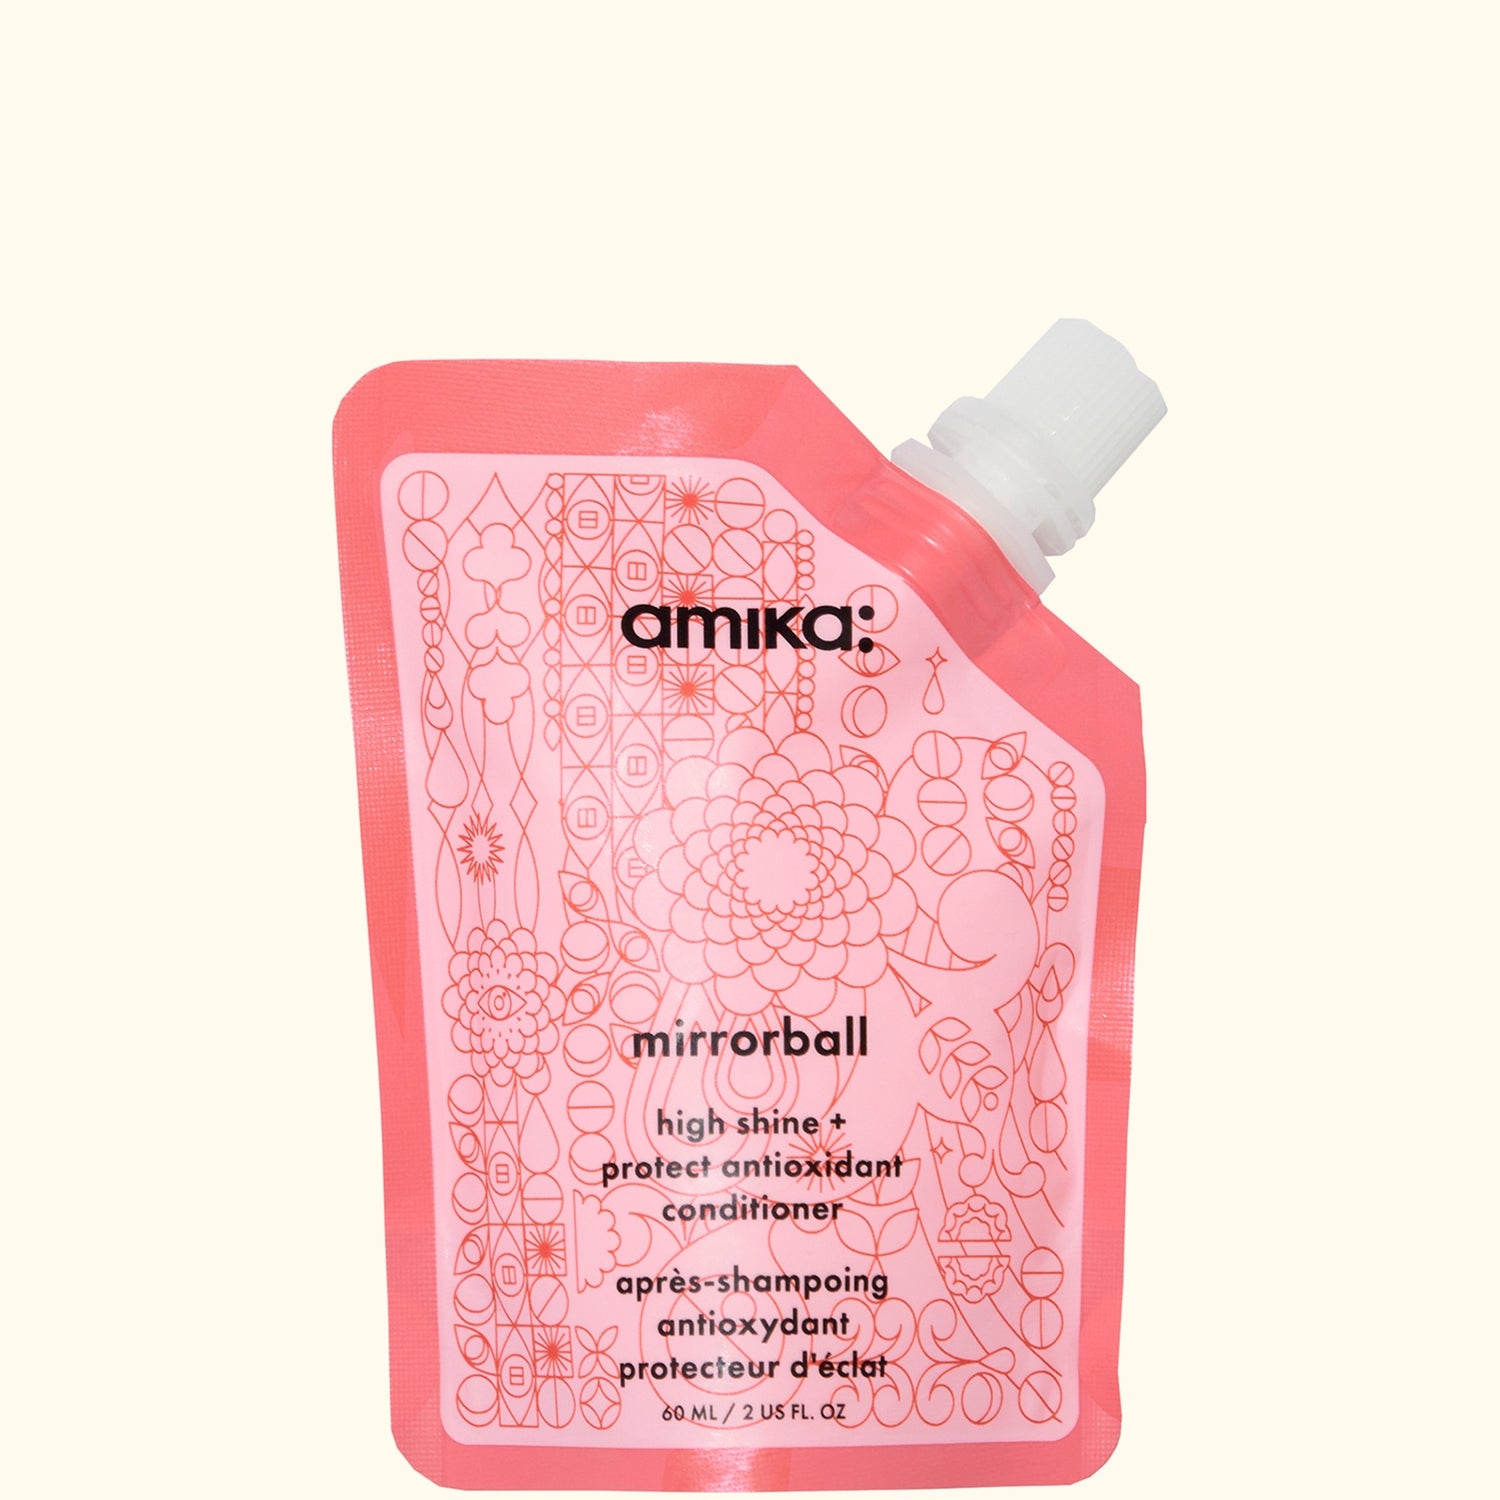 mirrorball high shine + protect antioxidant conditioner